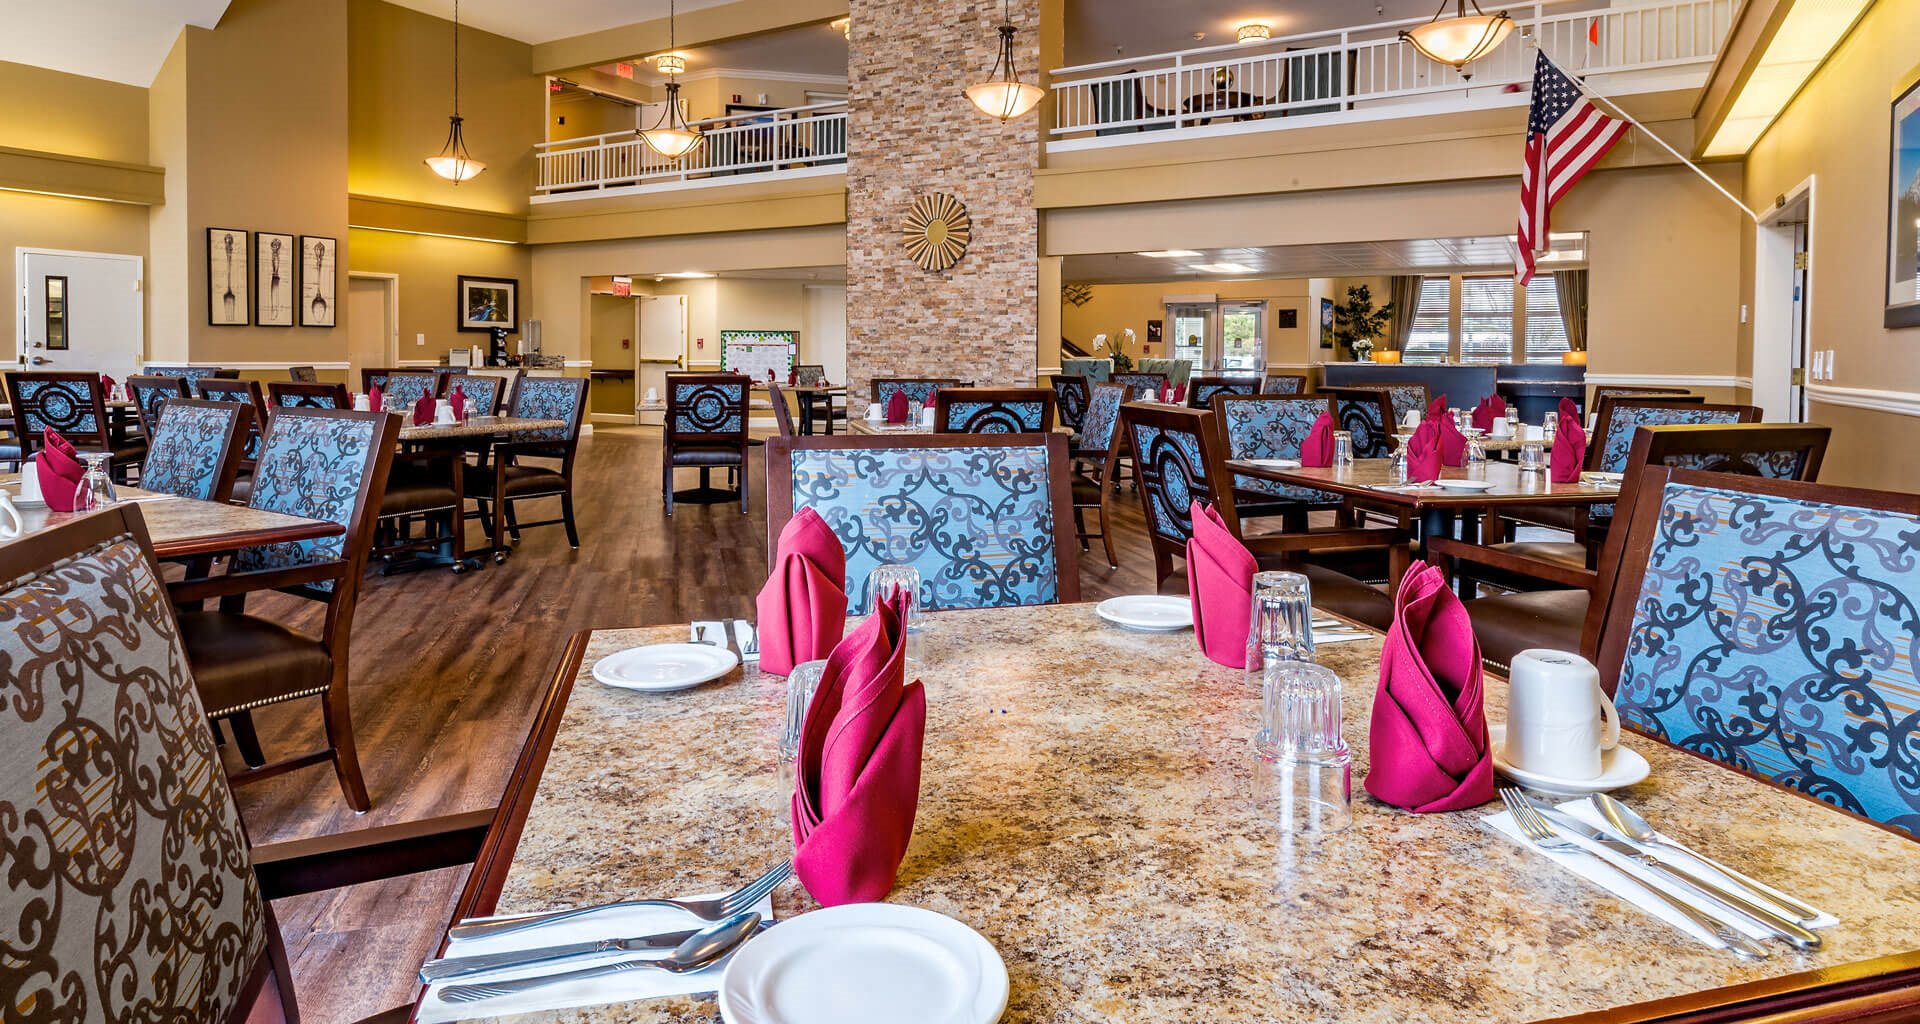 Eat-In Table With High Chairs In Clubhouse at Pacifica Senior Living Klamath Falls, Klamath Falls, OR, 97601